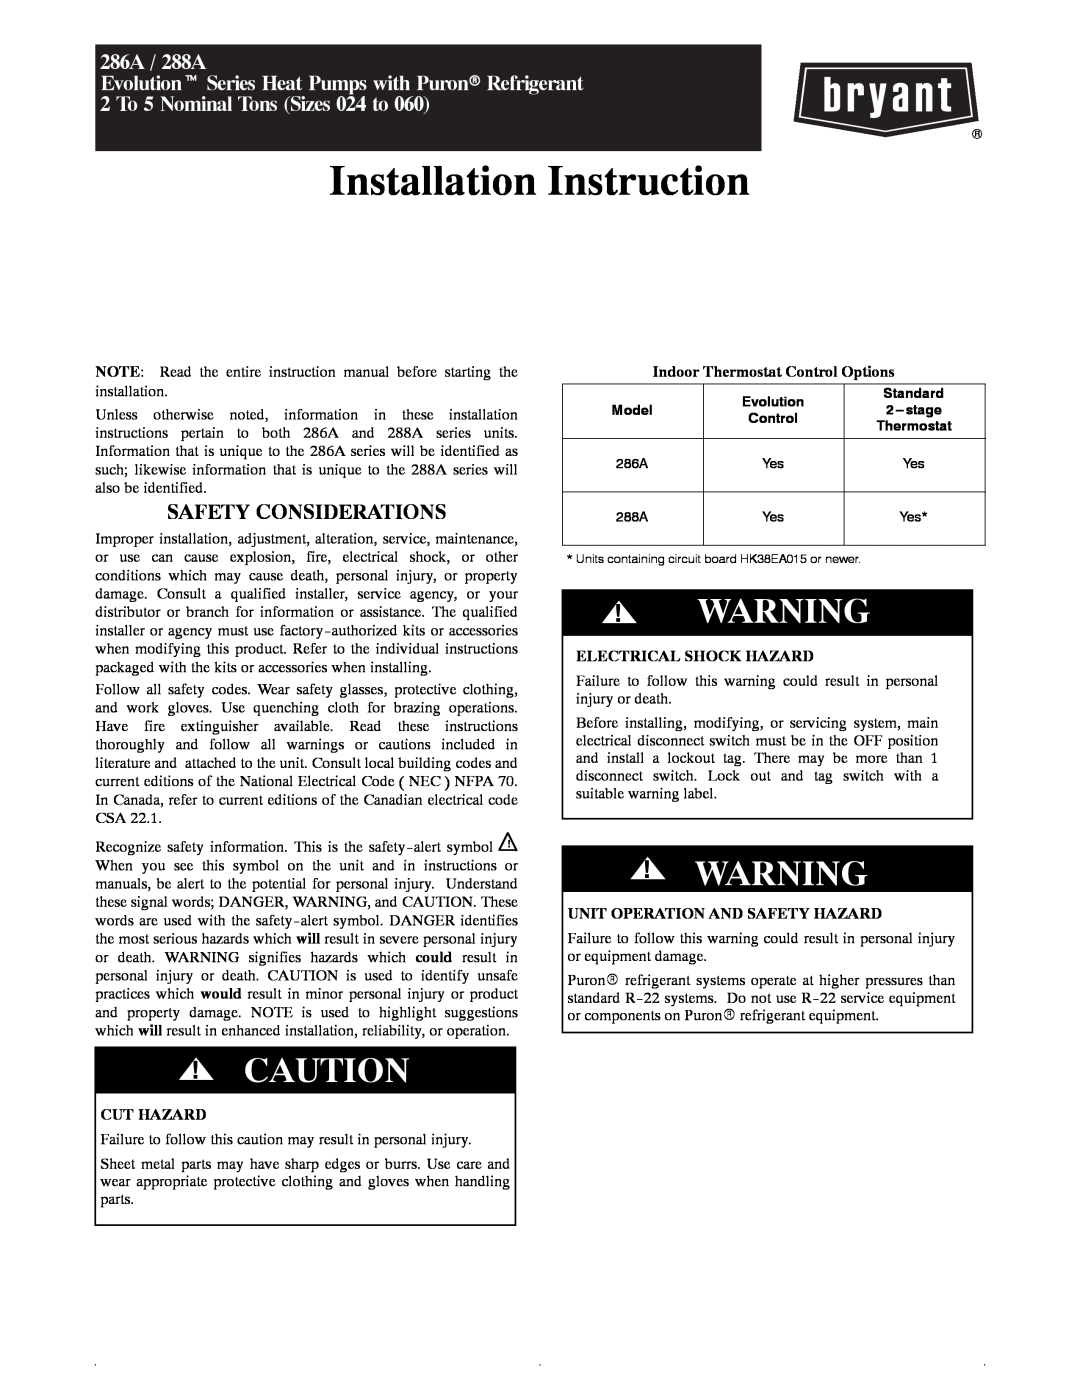 Bryant instruction manual Cut Hazard, Indoor Thermostat Control Options, Electrical Shock Hazard, 286A / 288A 